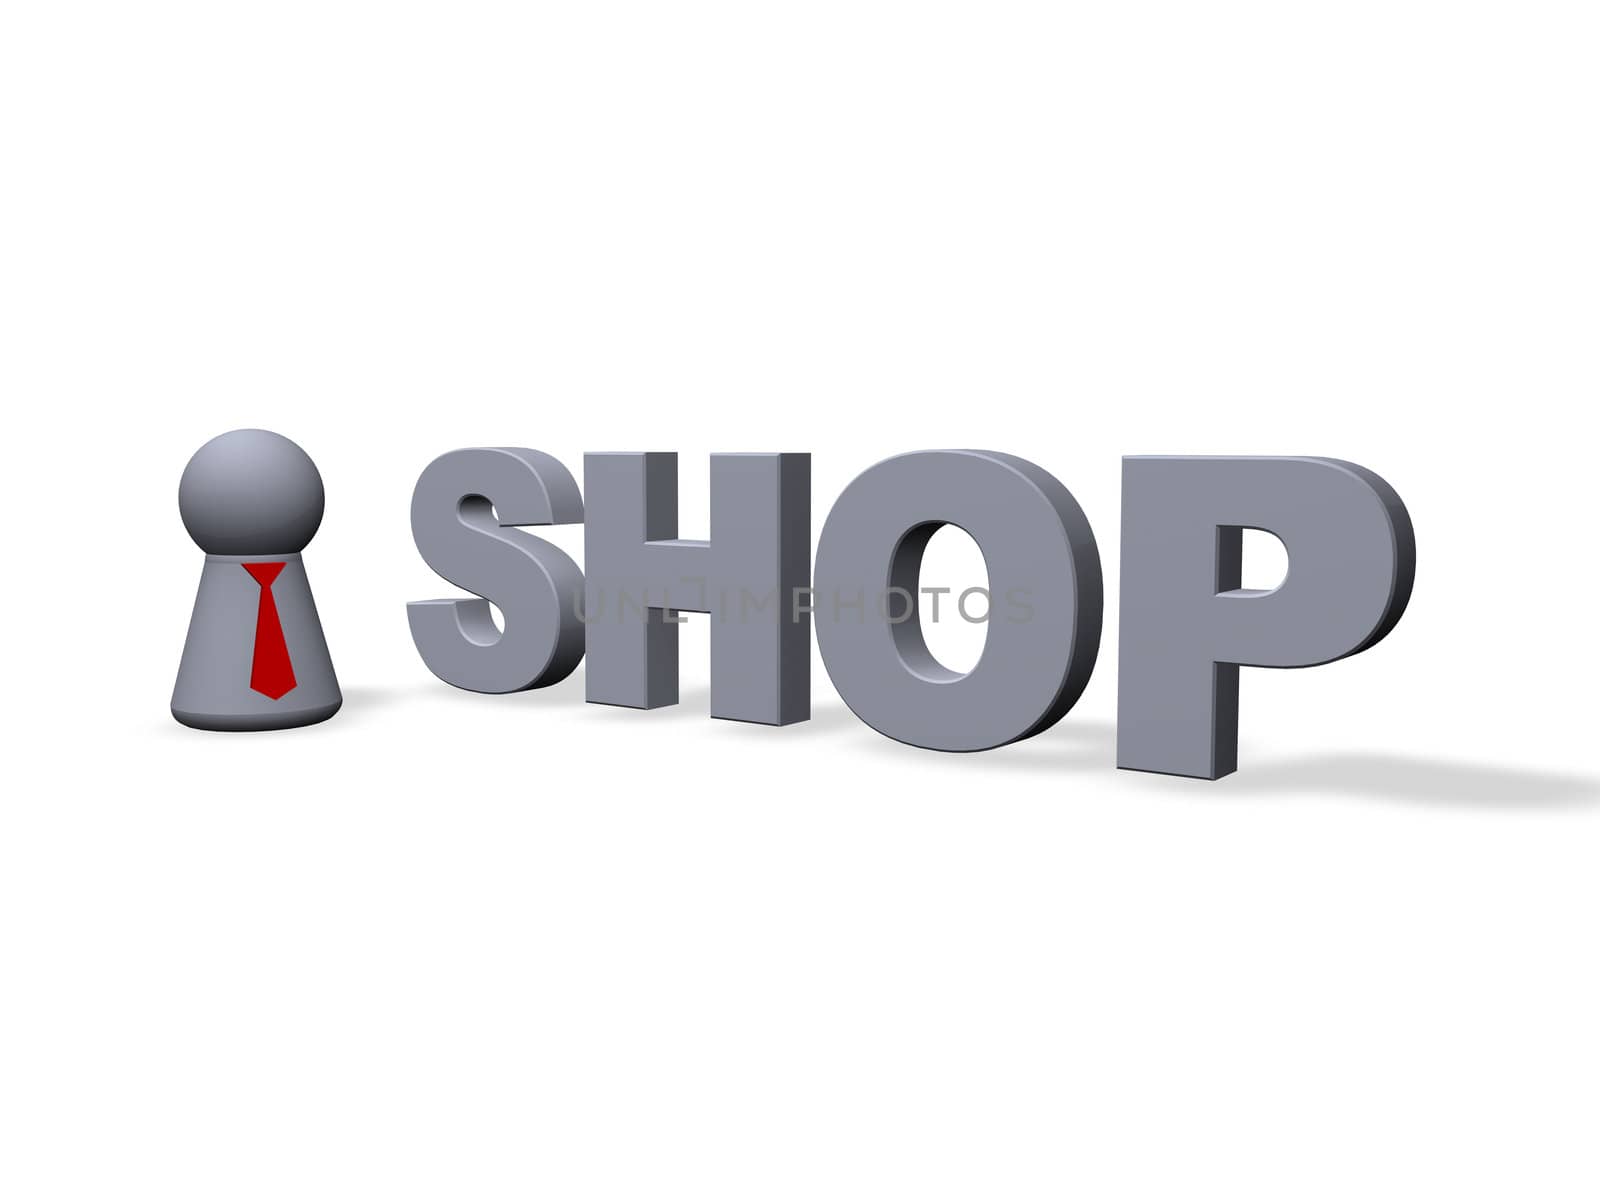 shop text in 3d and play figure with red tie